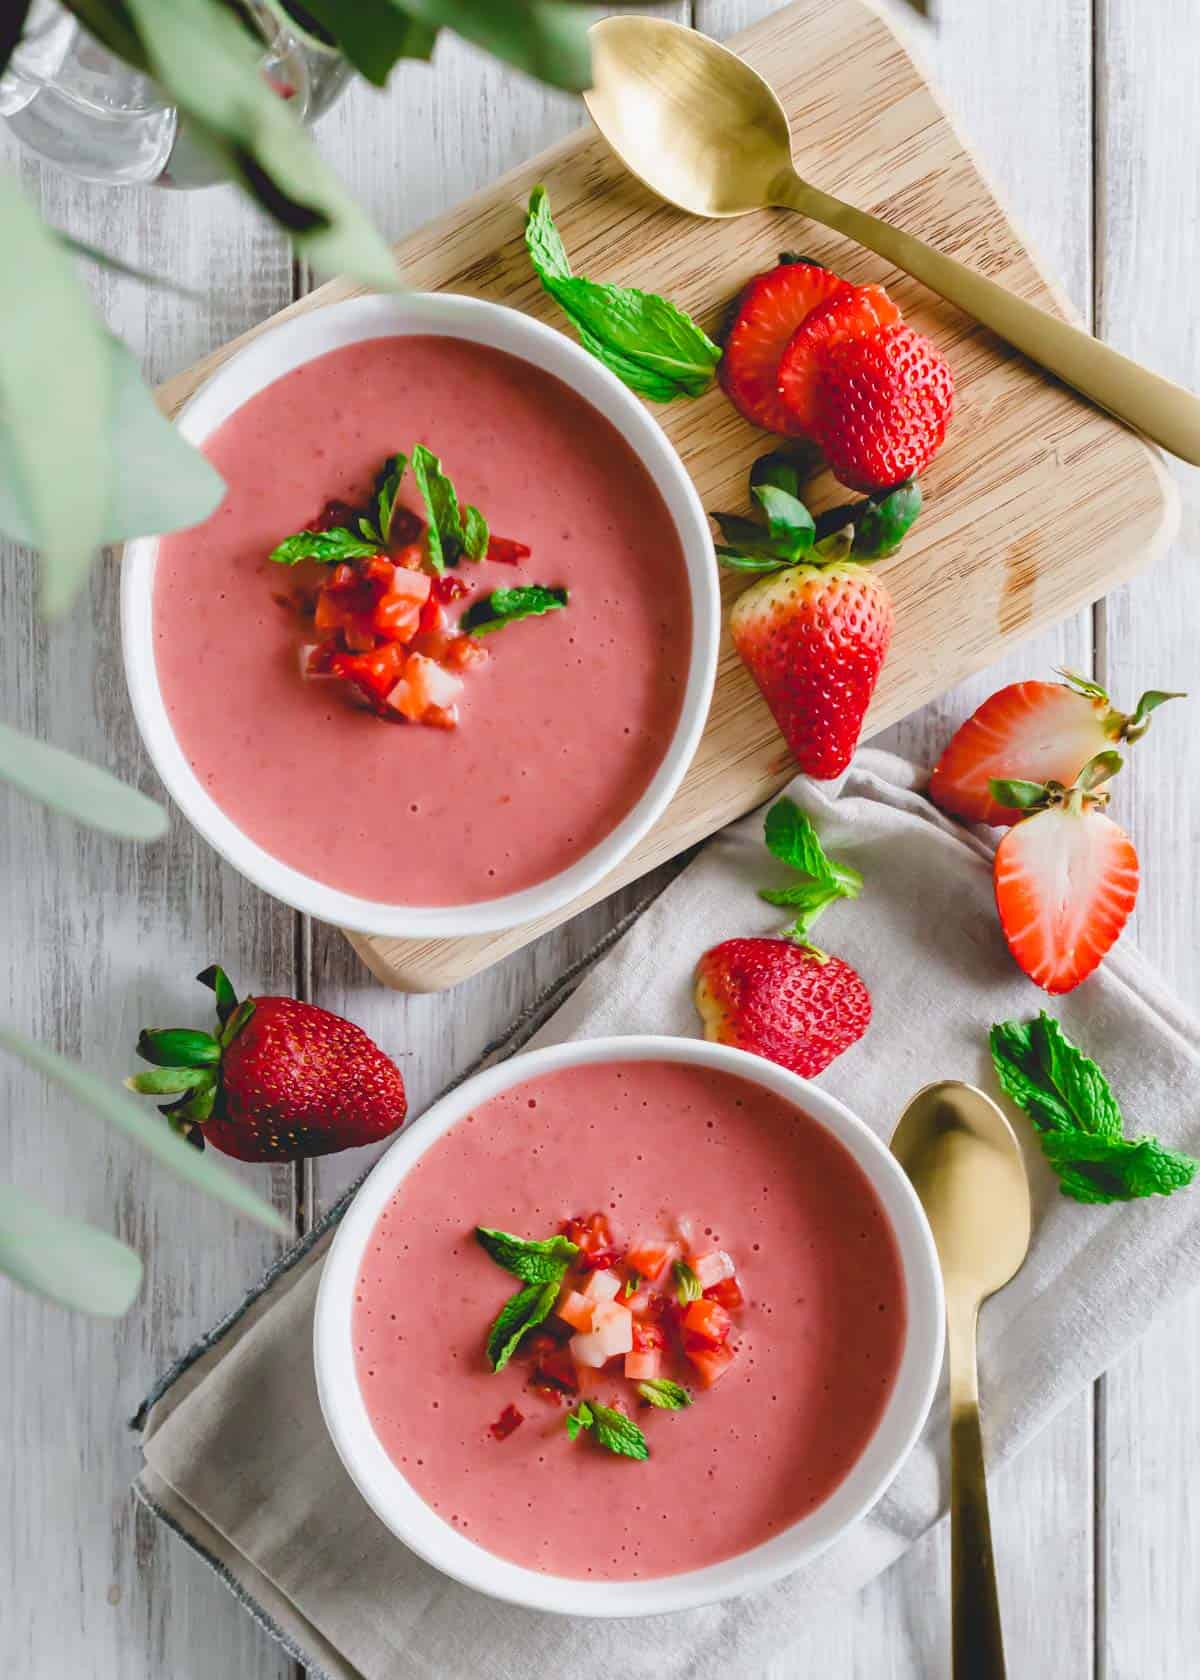 Chilled strawberry soup garnished with mint leaves and chopped strawberries.